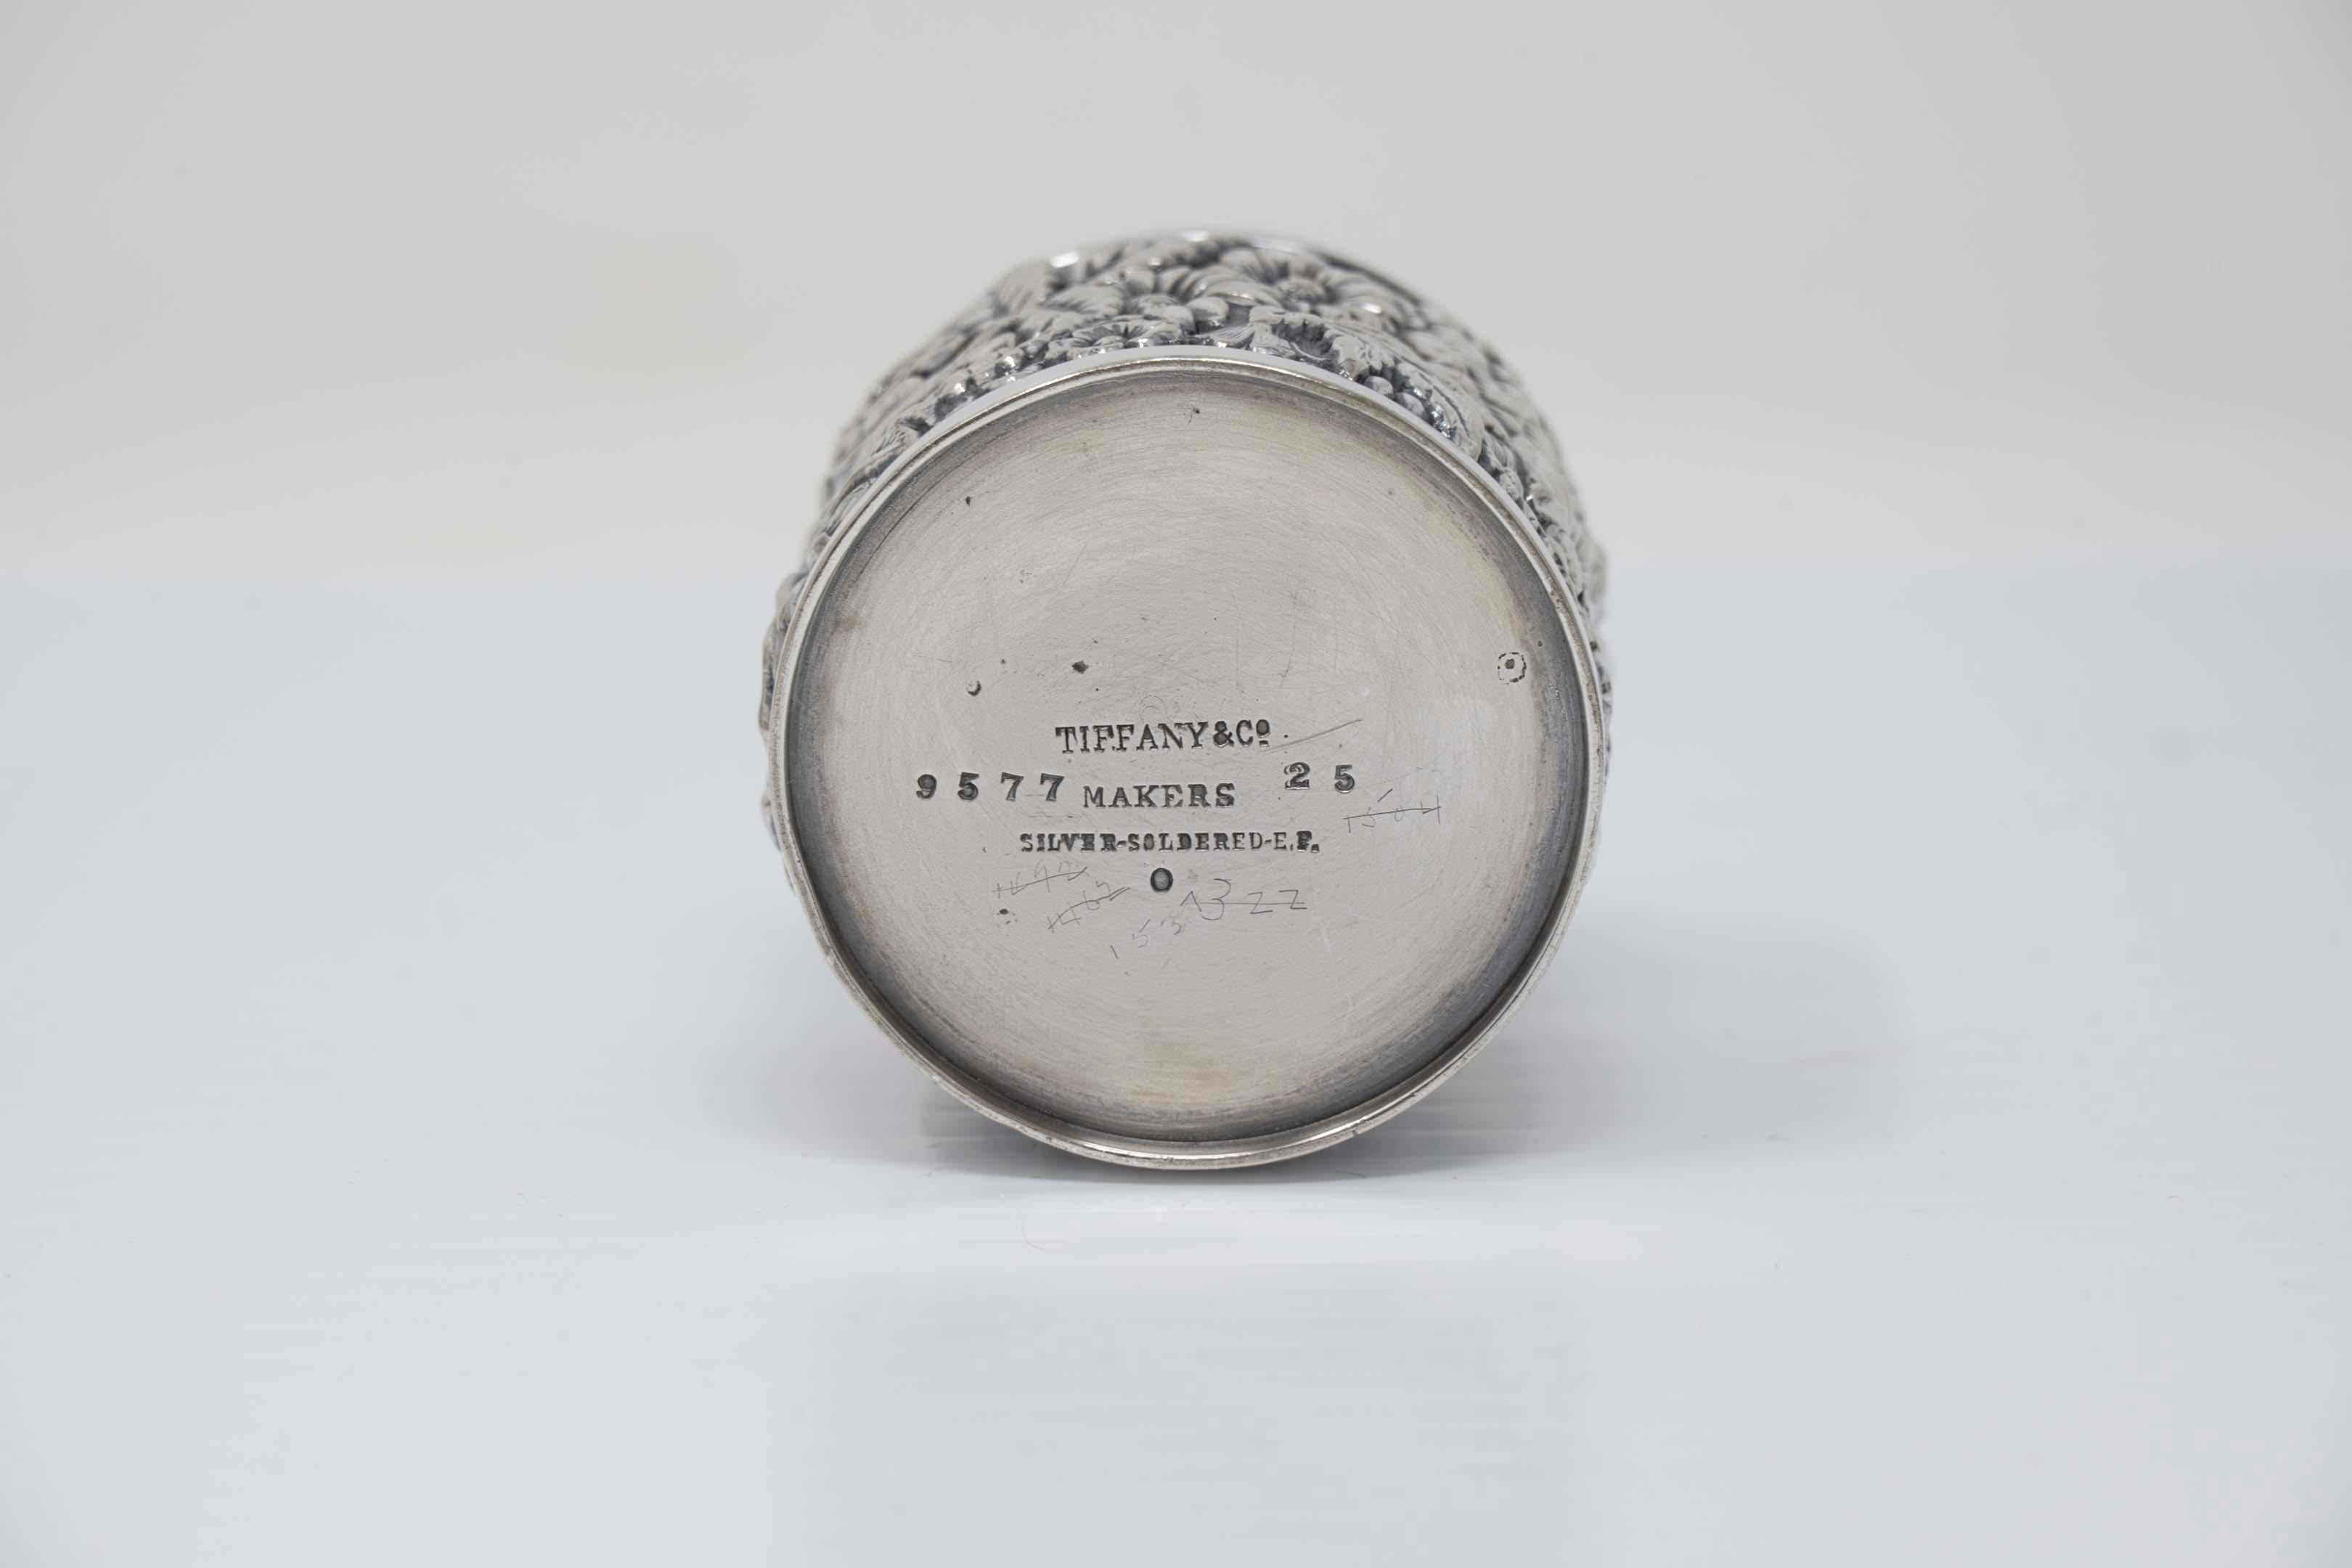 Tiffany and Co makers, 9577-25 silver soldered EF toothpick holder. Measures 40mm x 44mm in diameter, marked at the base. In good condition.
